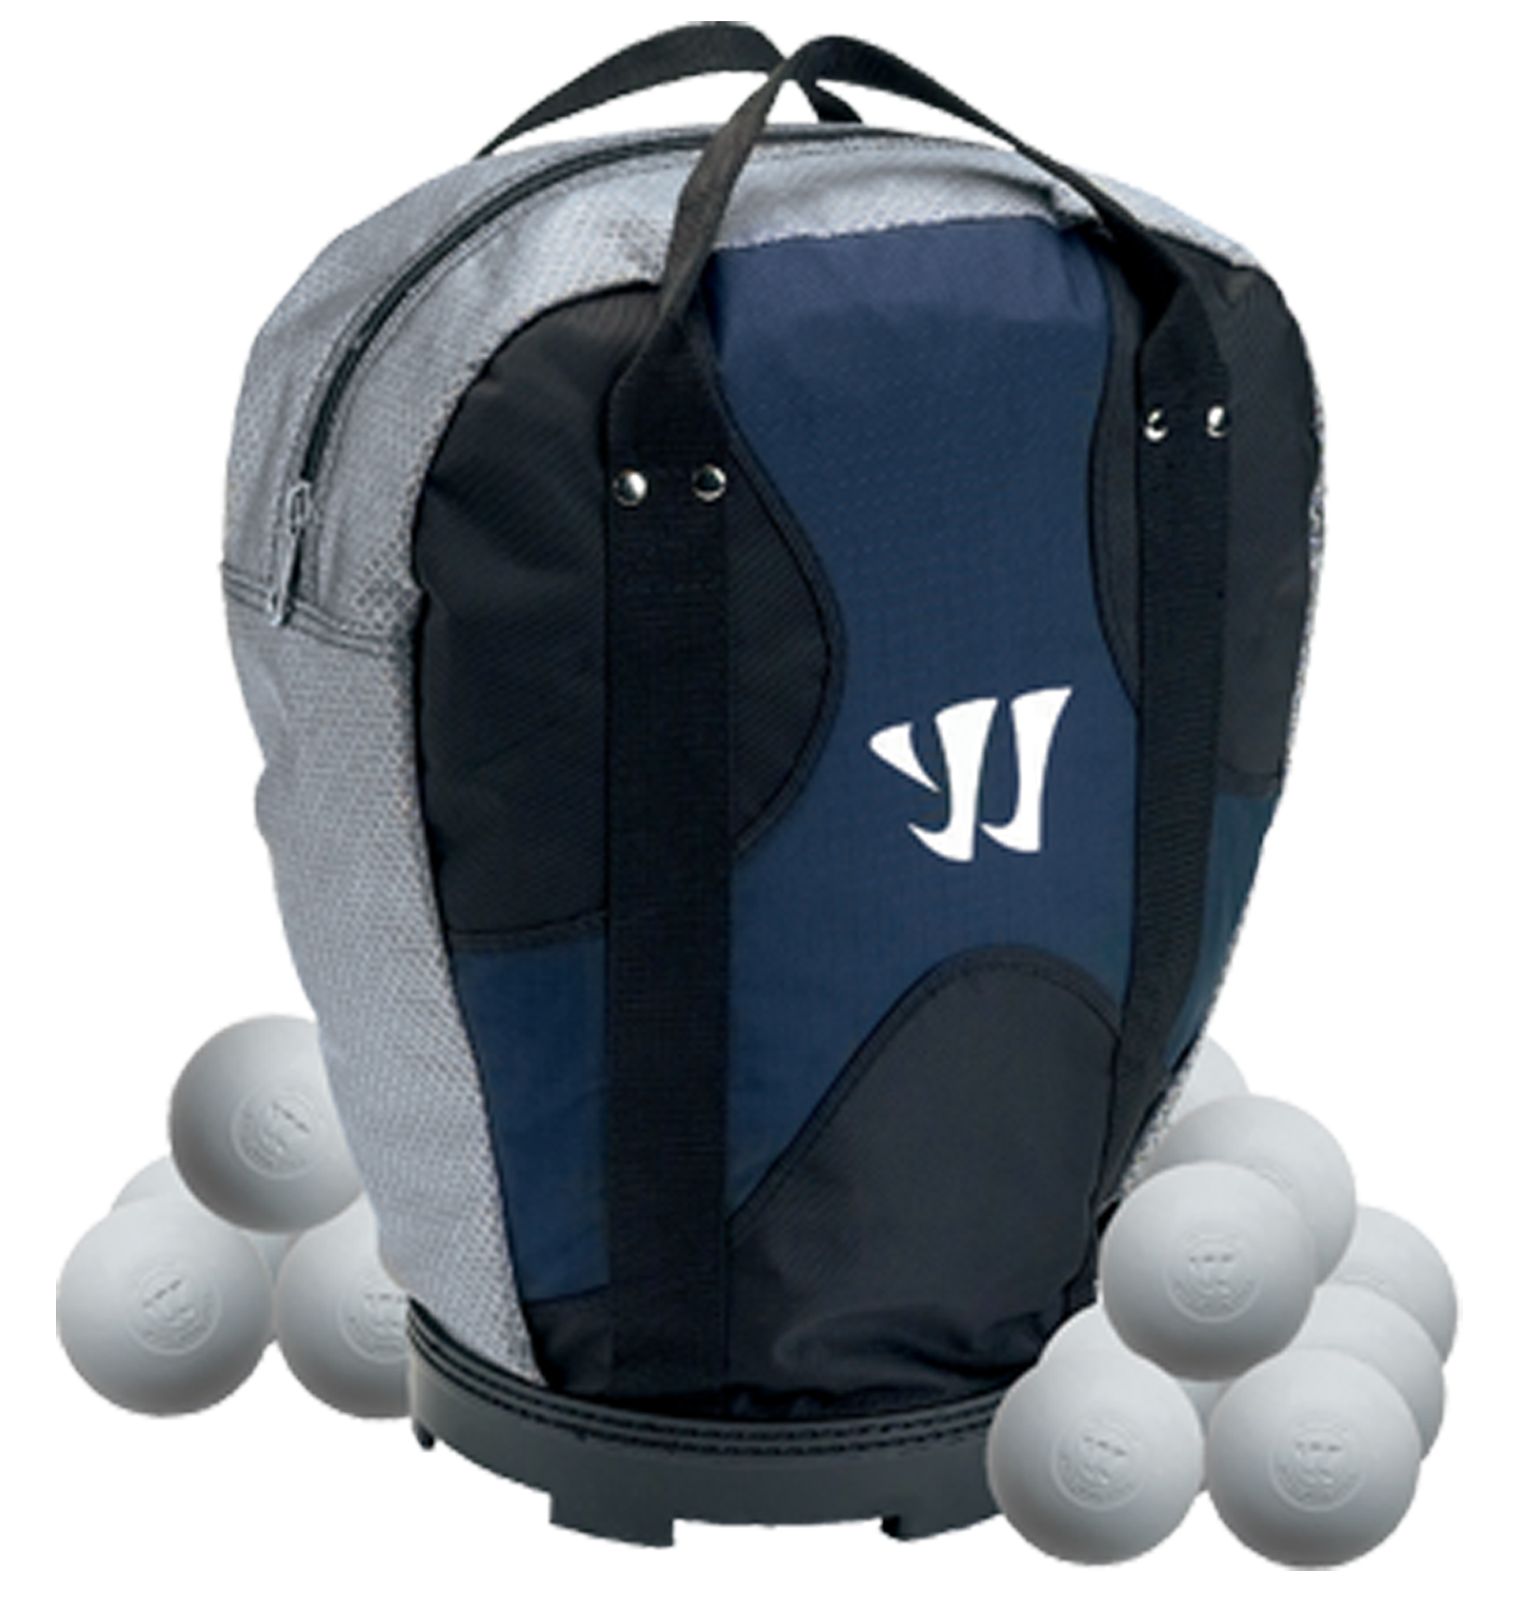 ROCK SAC BALL PACK, White image number 0